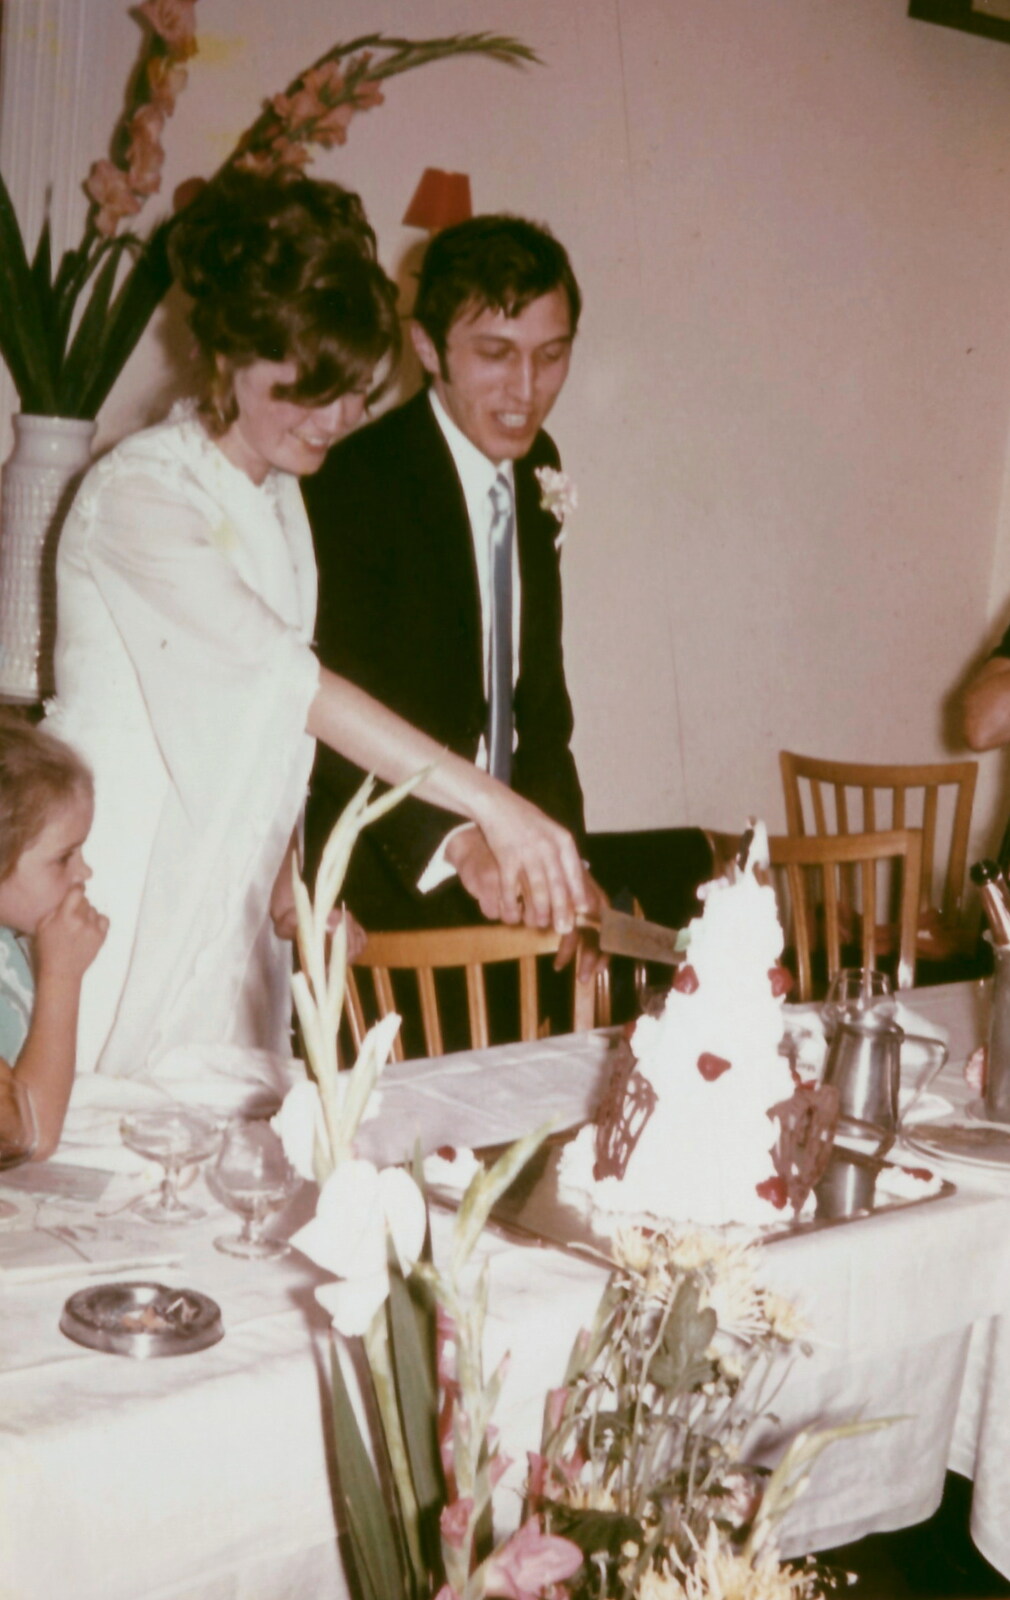 Family History: The 1960s - 24th January 2020: Judith and Bruno cut the cake